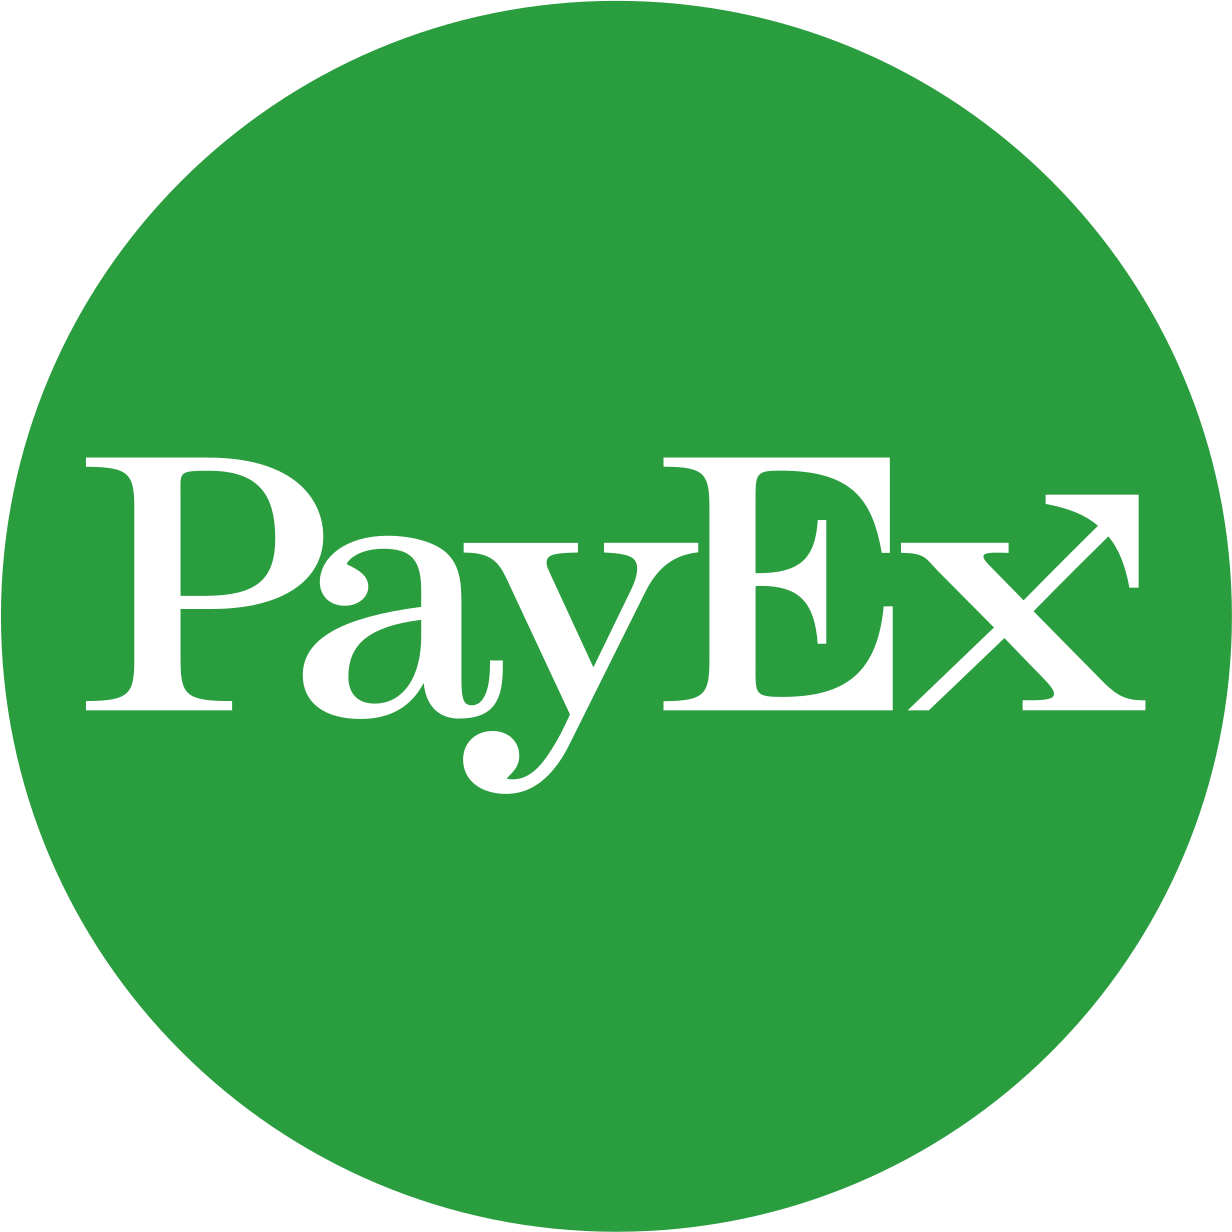 PayEx established a secure and flexible IAM system allowing for easier customer integrations